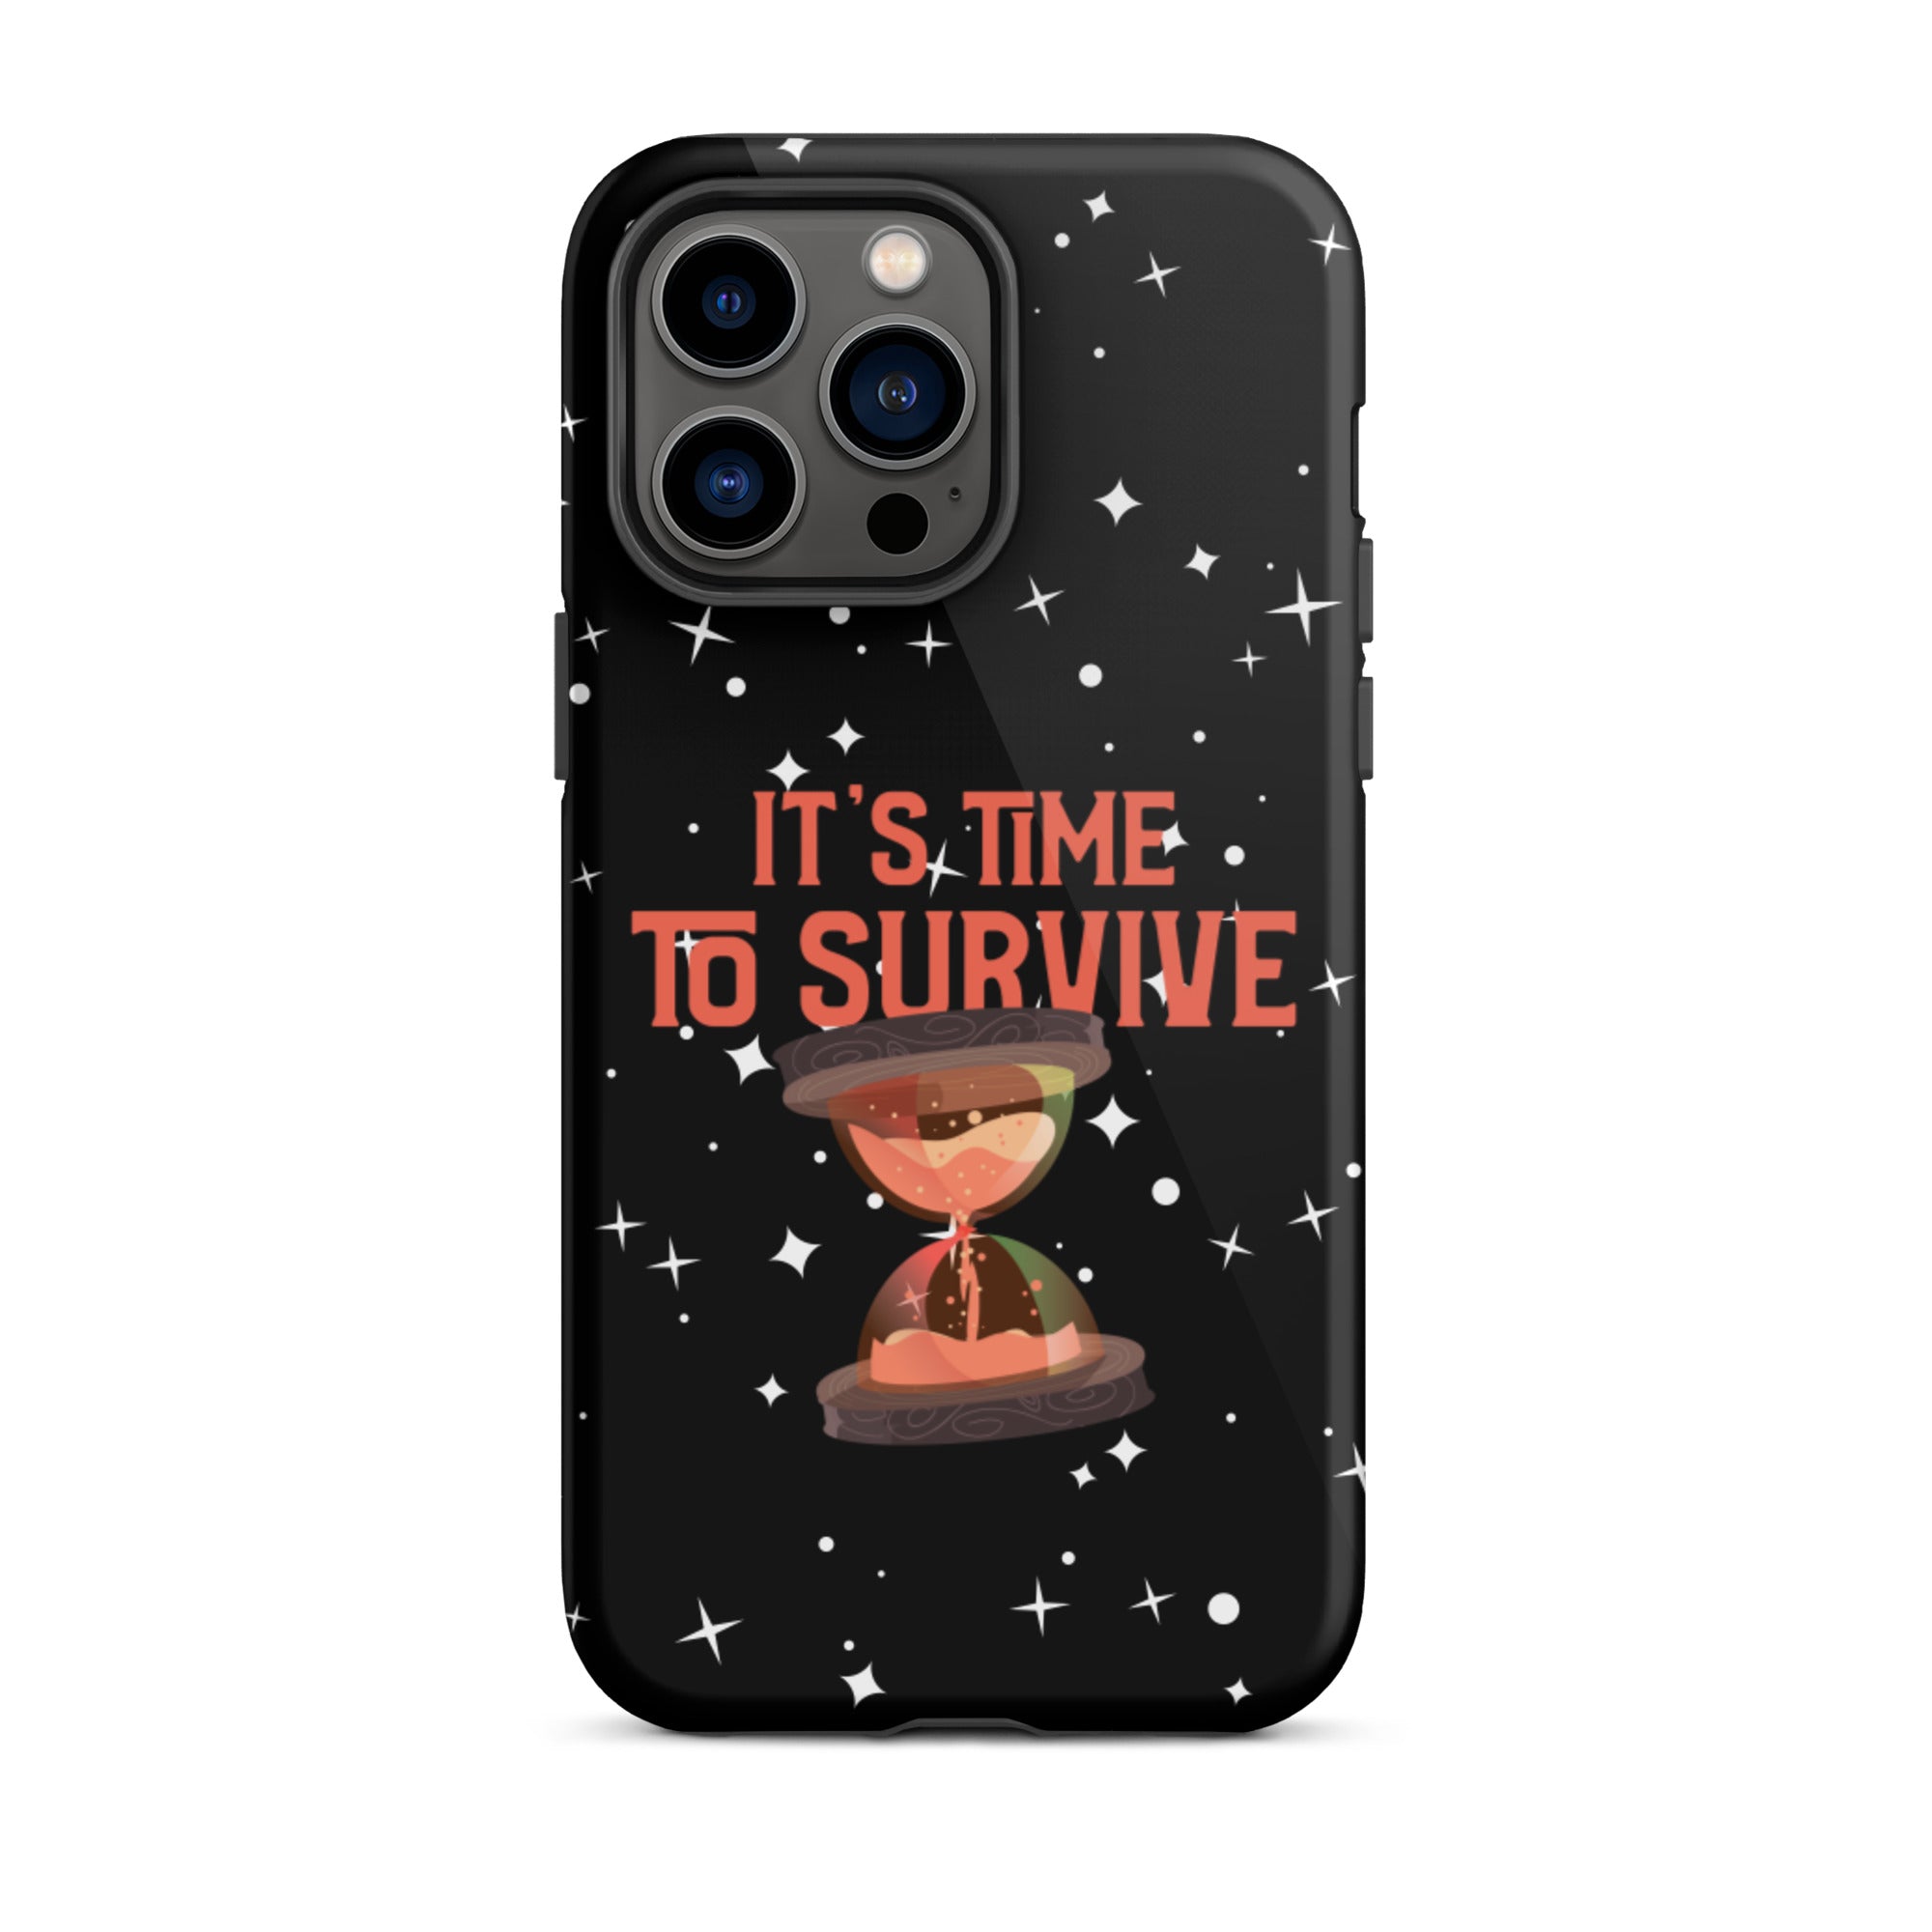 Its time to survive - Tough iPhone case